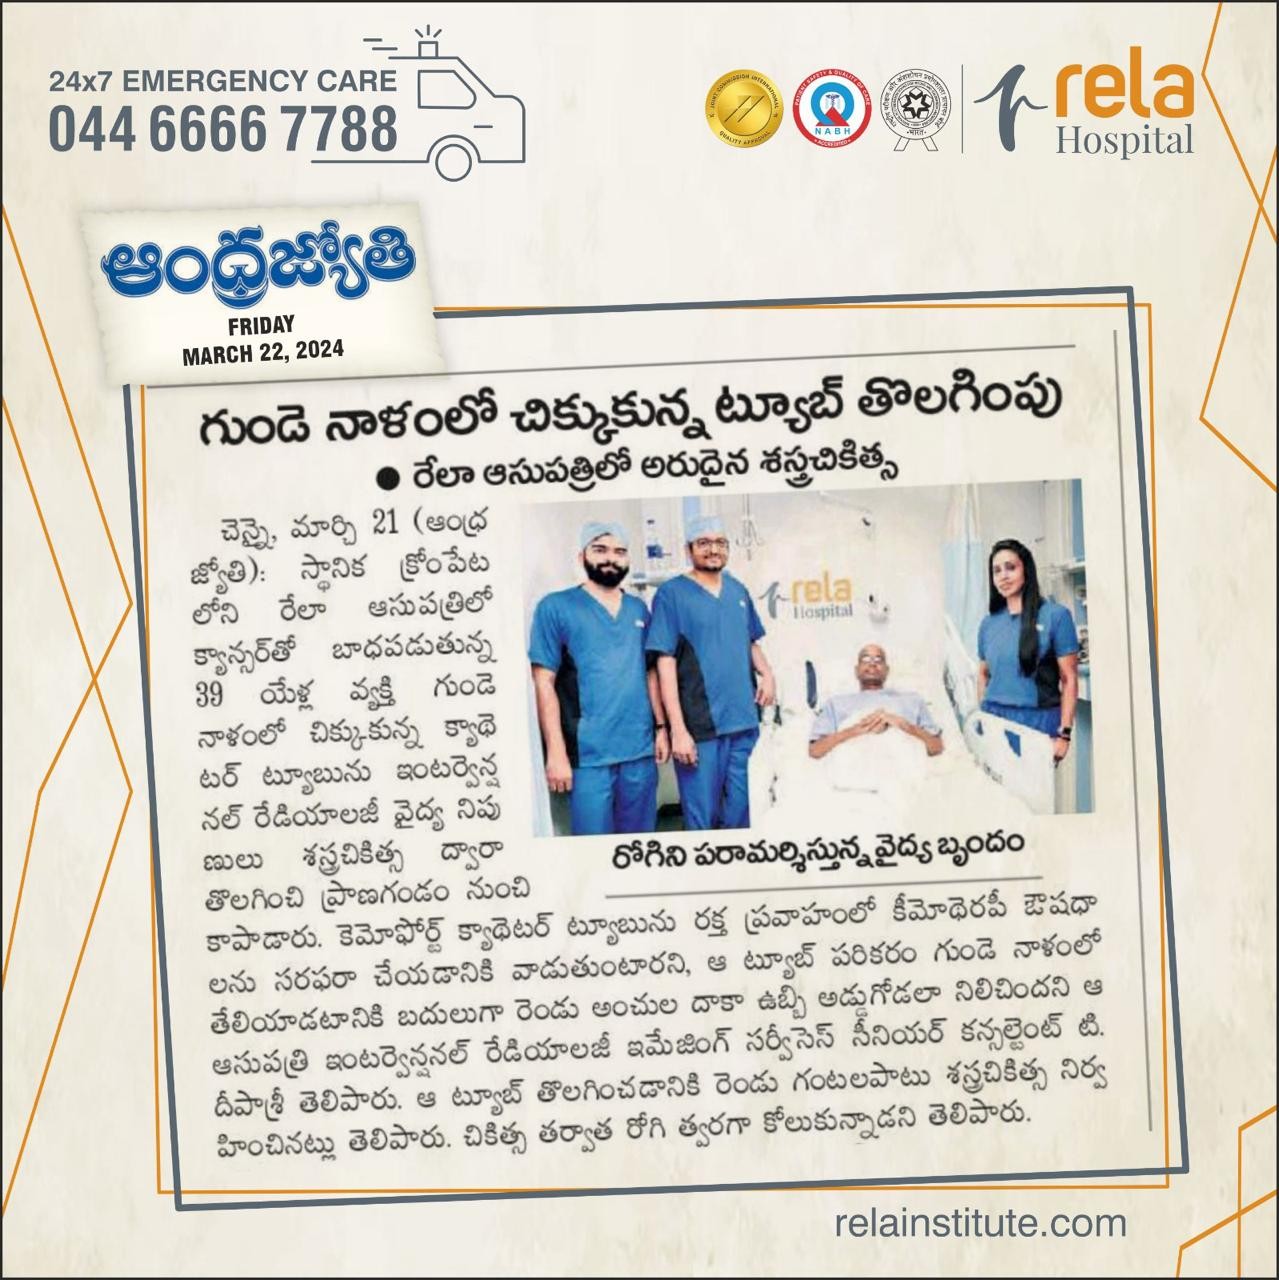 Interventional Radiologists At Rela Hospital Remove Dislodged Medical Catheter Stuck Inside The Heart Of Cancer Patient